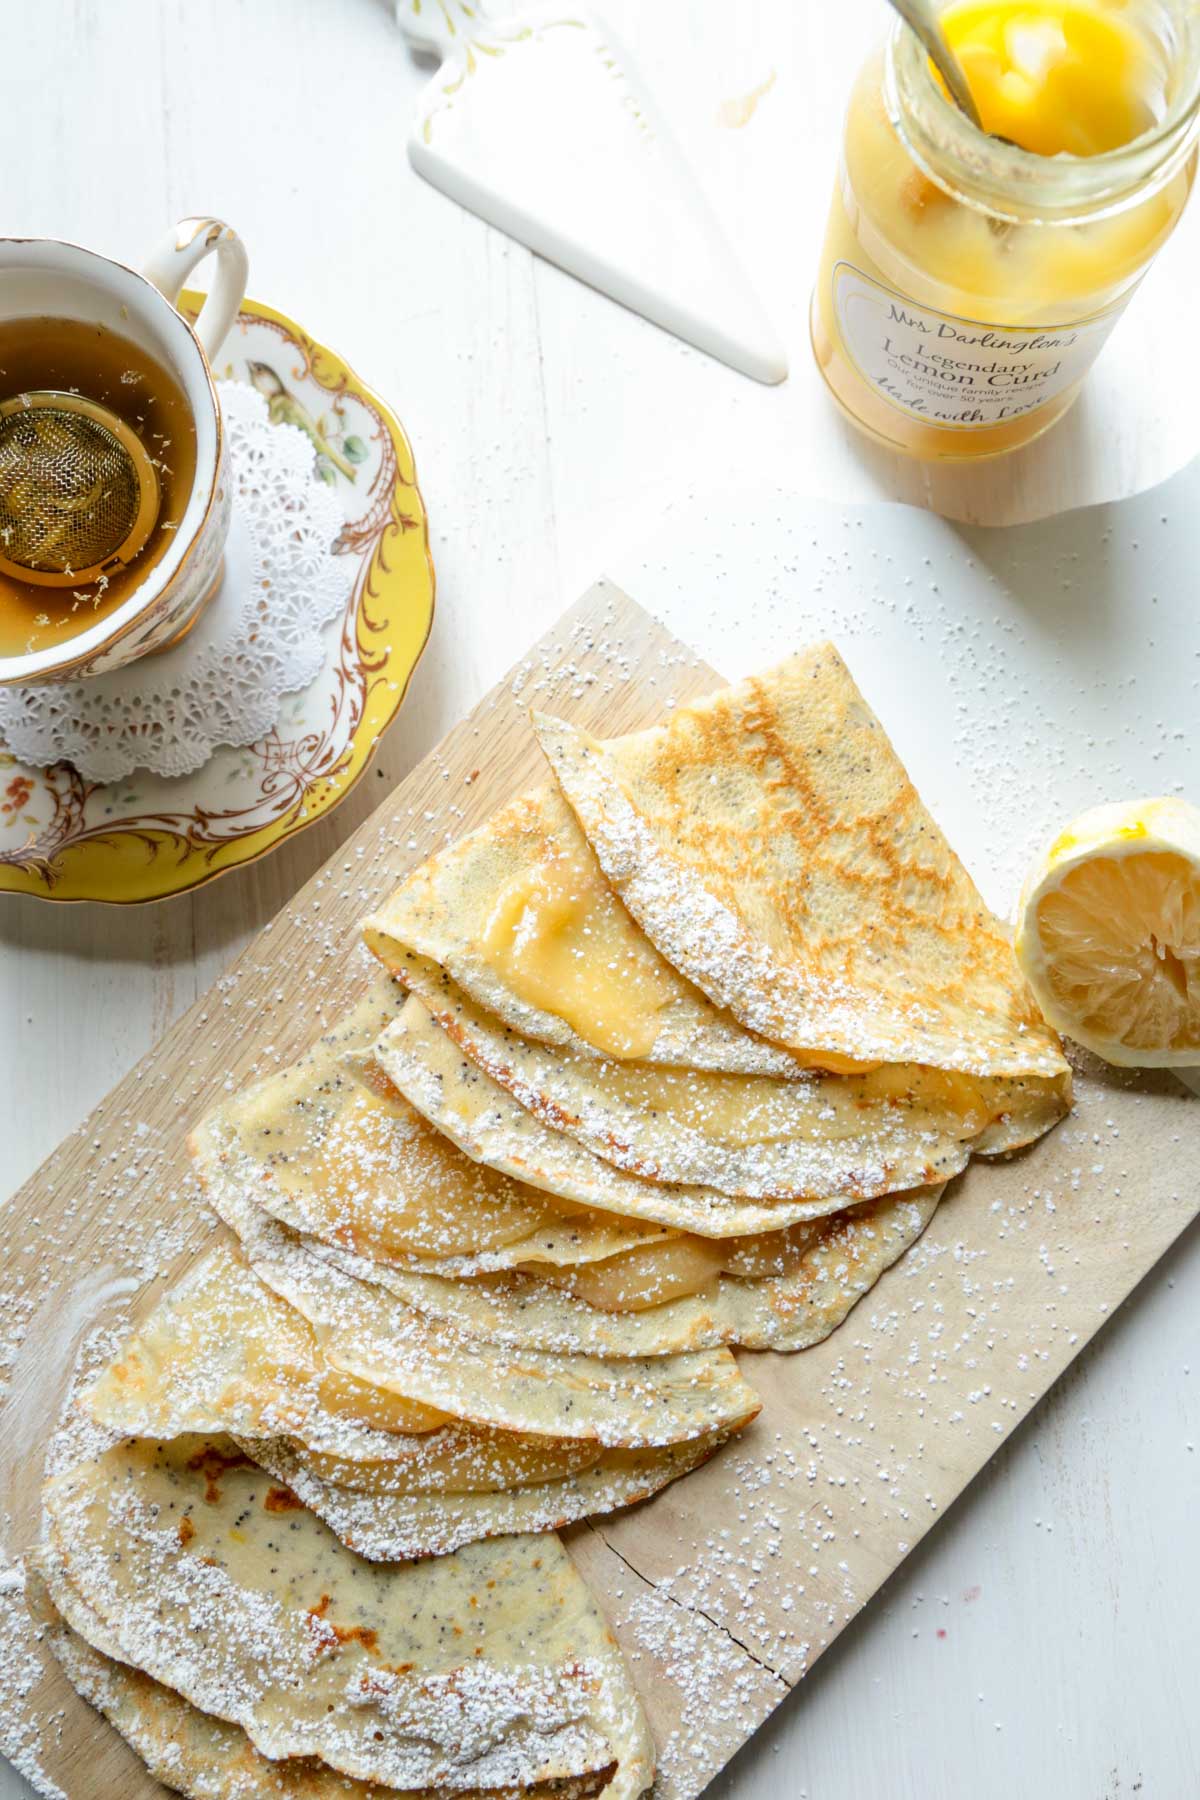 Lemon Poppyseed Crepes with Lemon Curd - And NO Fancy Pans Required! - homemadehome.com